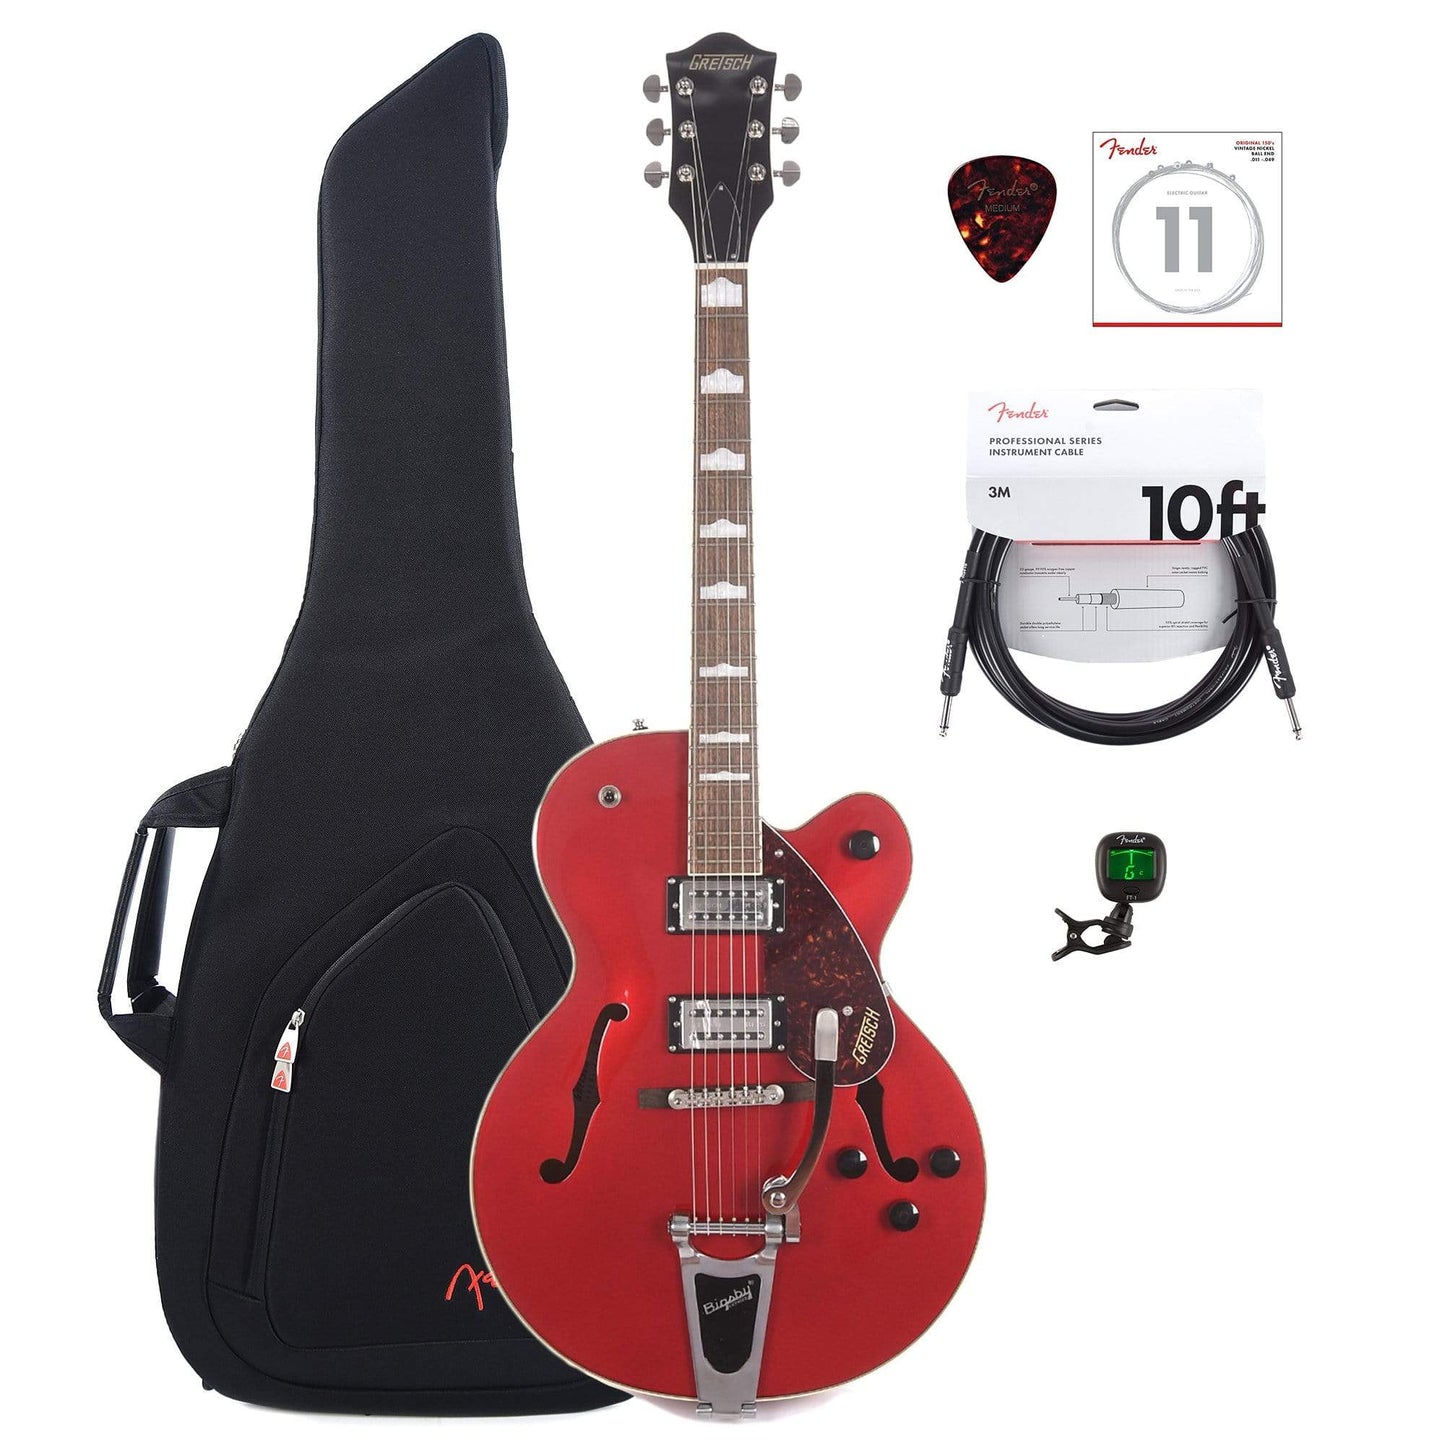 Gretsch G2420T Streamliner Hollow Body Candy Apple Red w/Bigsby & Broad'Tron Pickups w/Gig Bag, Tuner, (1) Cable, Picks and Strings Bundle Electric Guitars / Hollow Body